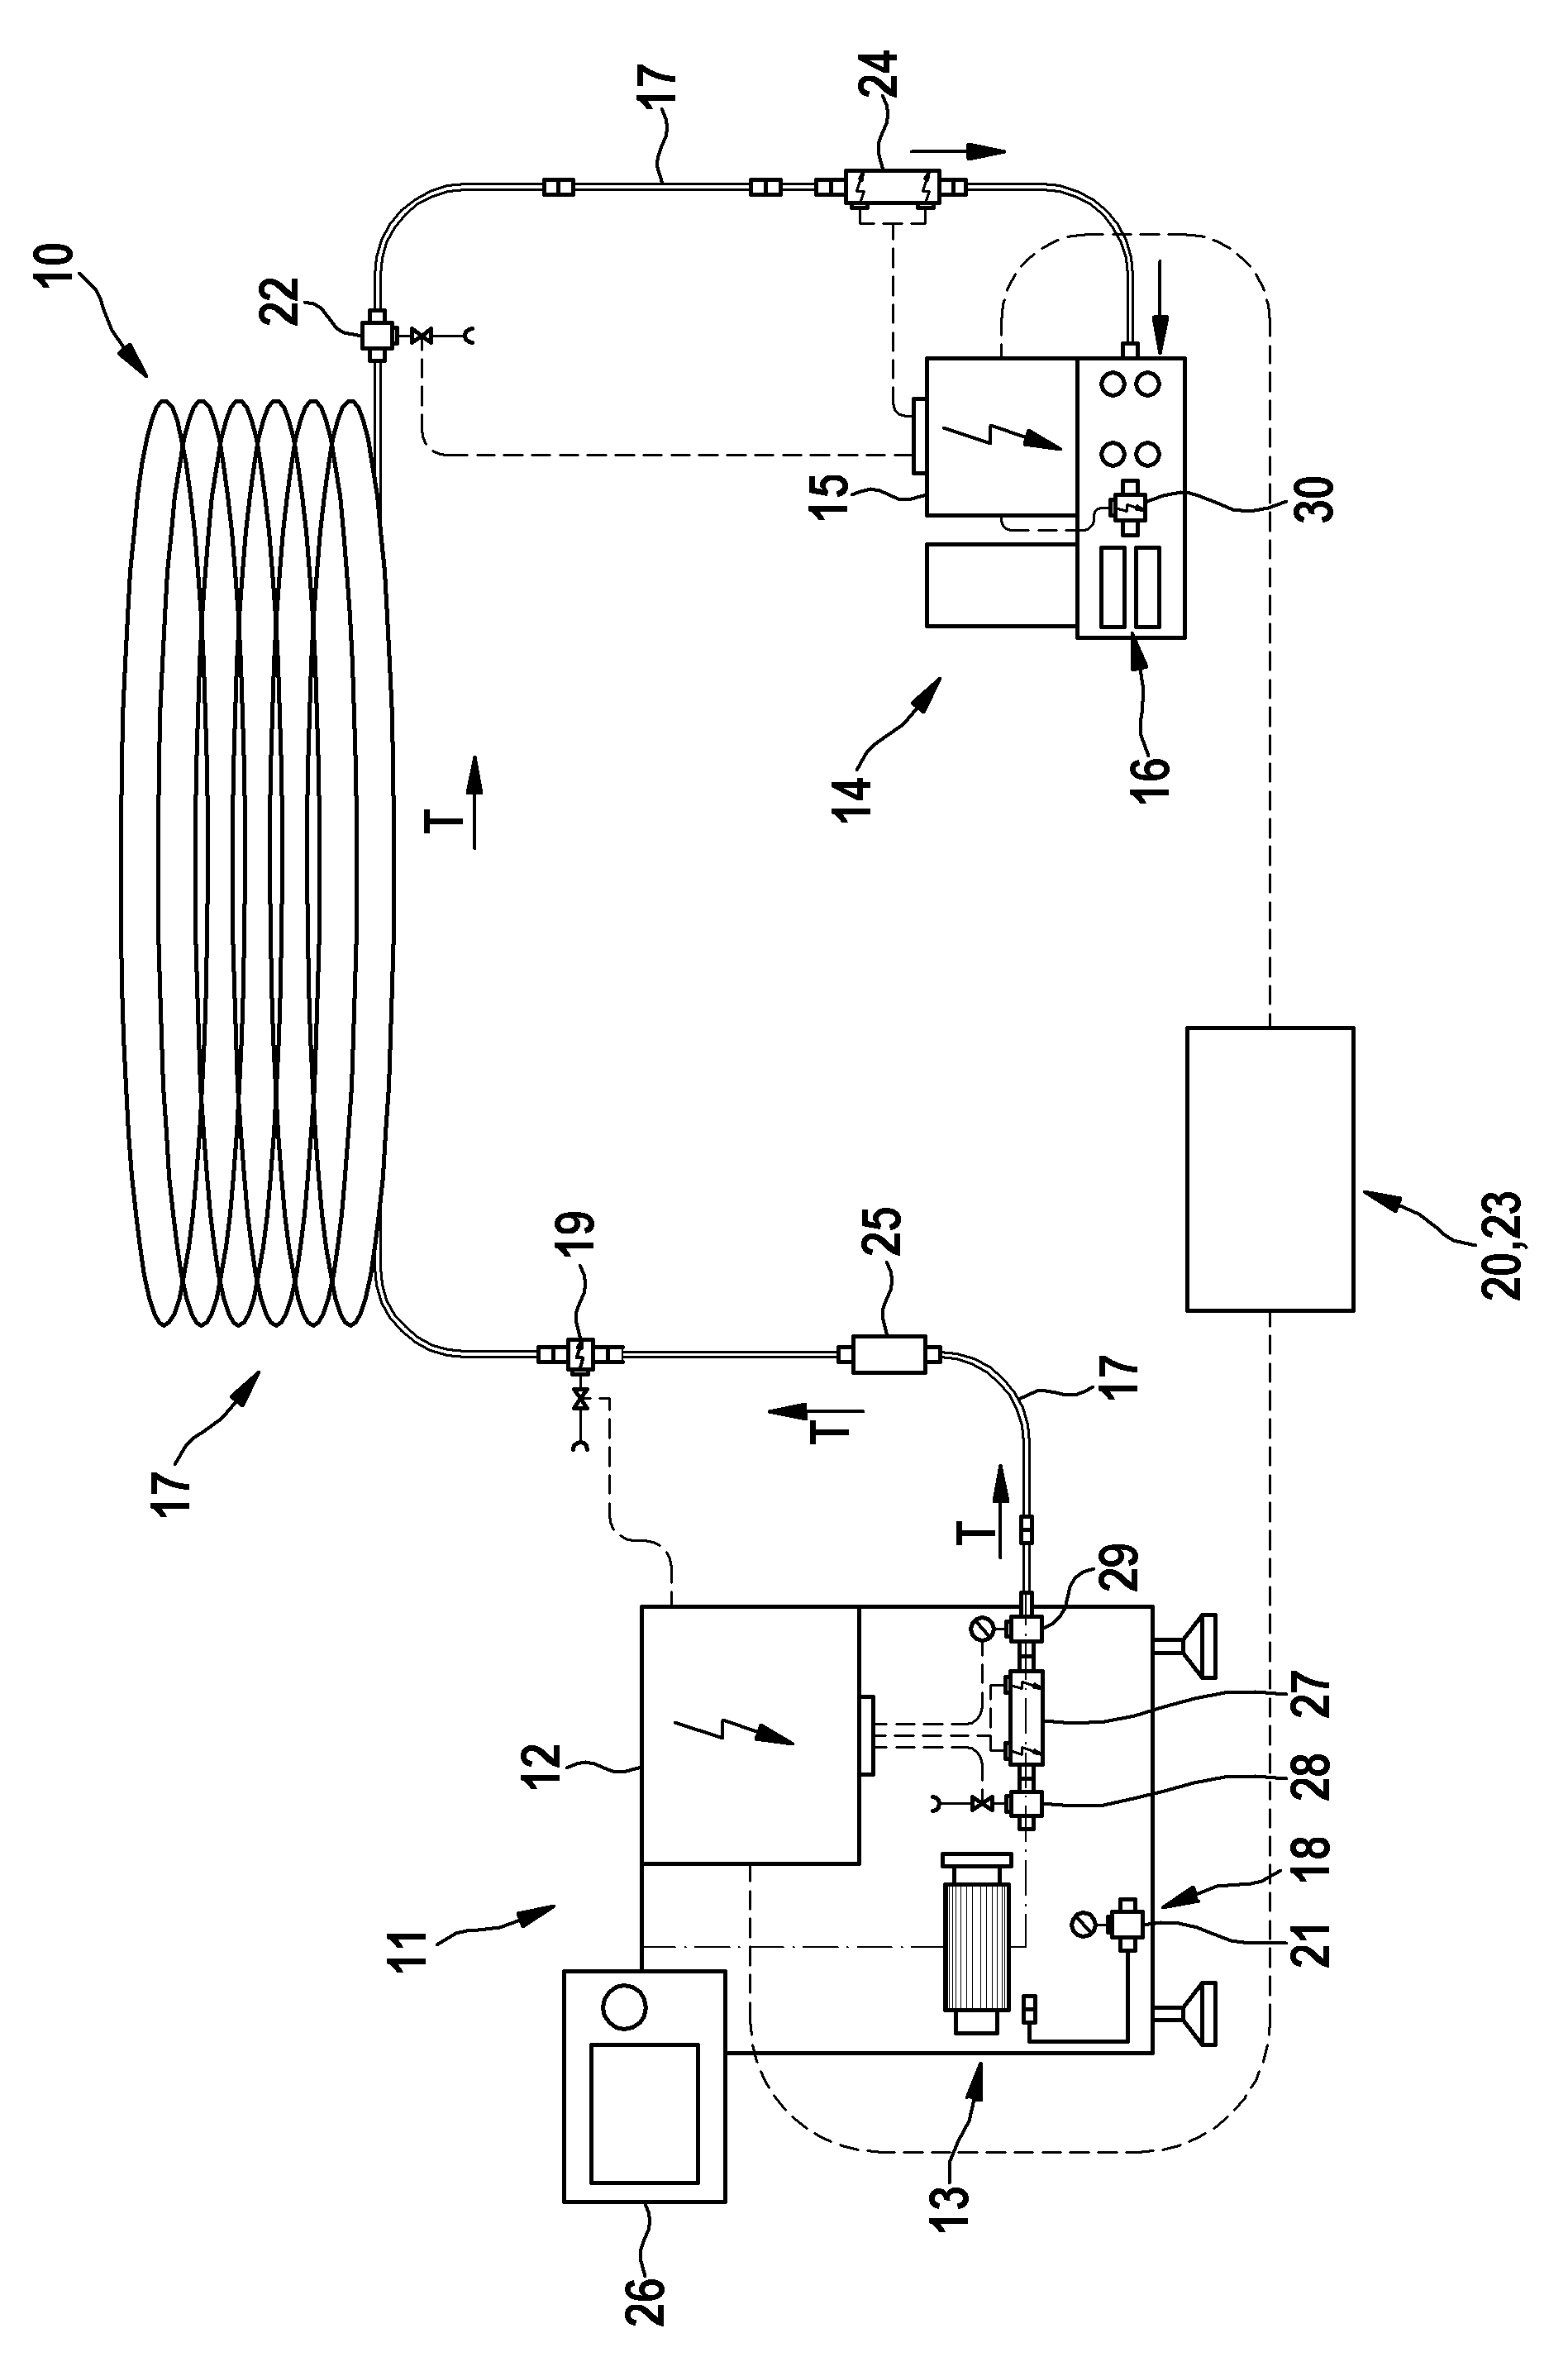 Assembly and method for transferring rod-shaped items for the tobacco processing industry from a sender unit to a receiver unit